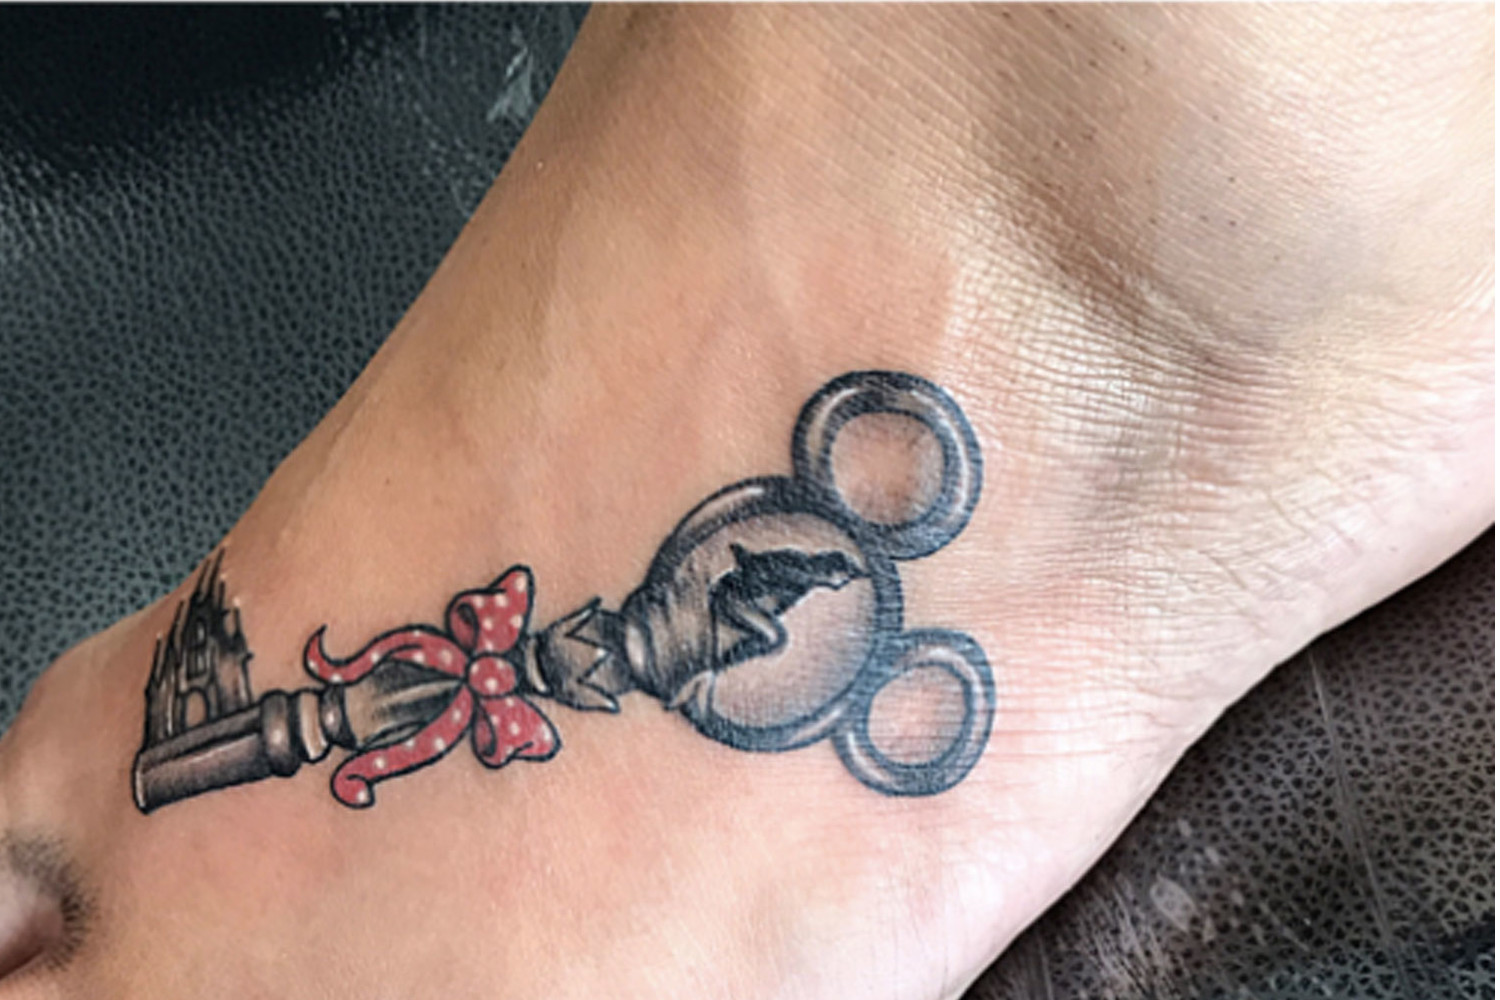 EngineerInk Tattoo  Body Piercing  Mother daughter tattoos  of Pooh  Bear and Piglet  by boehmer85        disneydisneytattoomotherdaughtermotherdaughtertattoopoohbearpoohandpigletpoohbeartattoo  disneytatts disneytat 